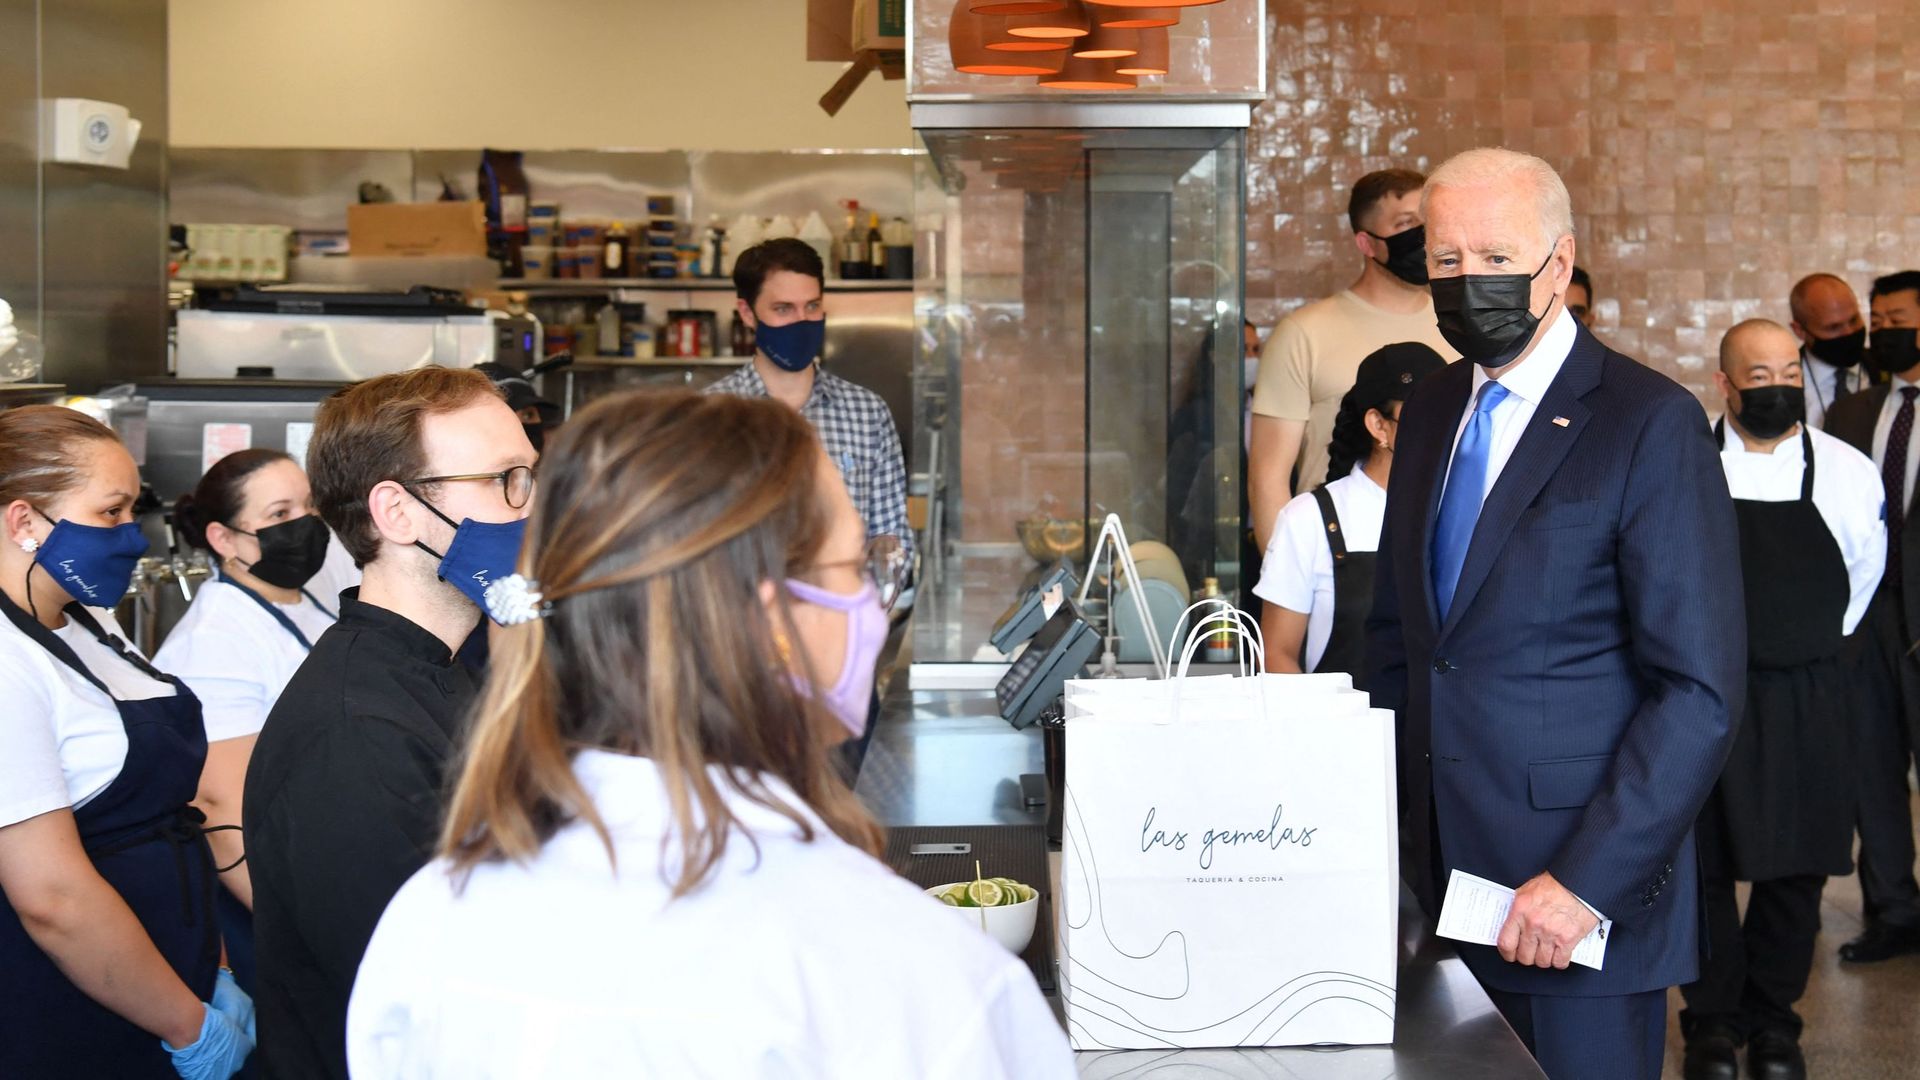 President Biden surrounded by workers at Las Gemelas Taqueria in 2021.